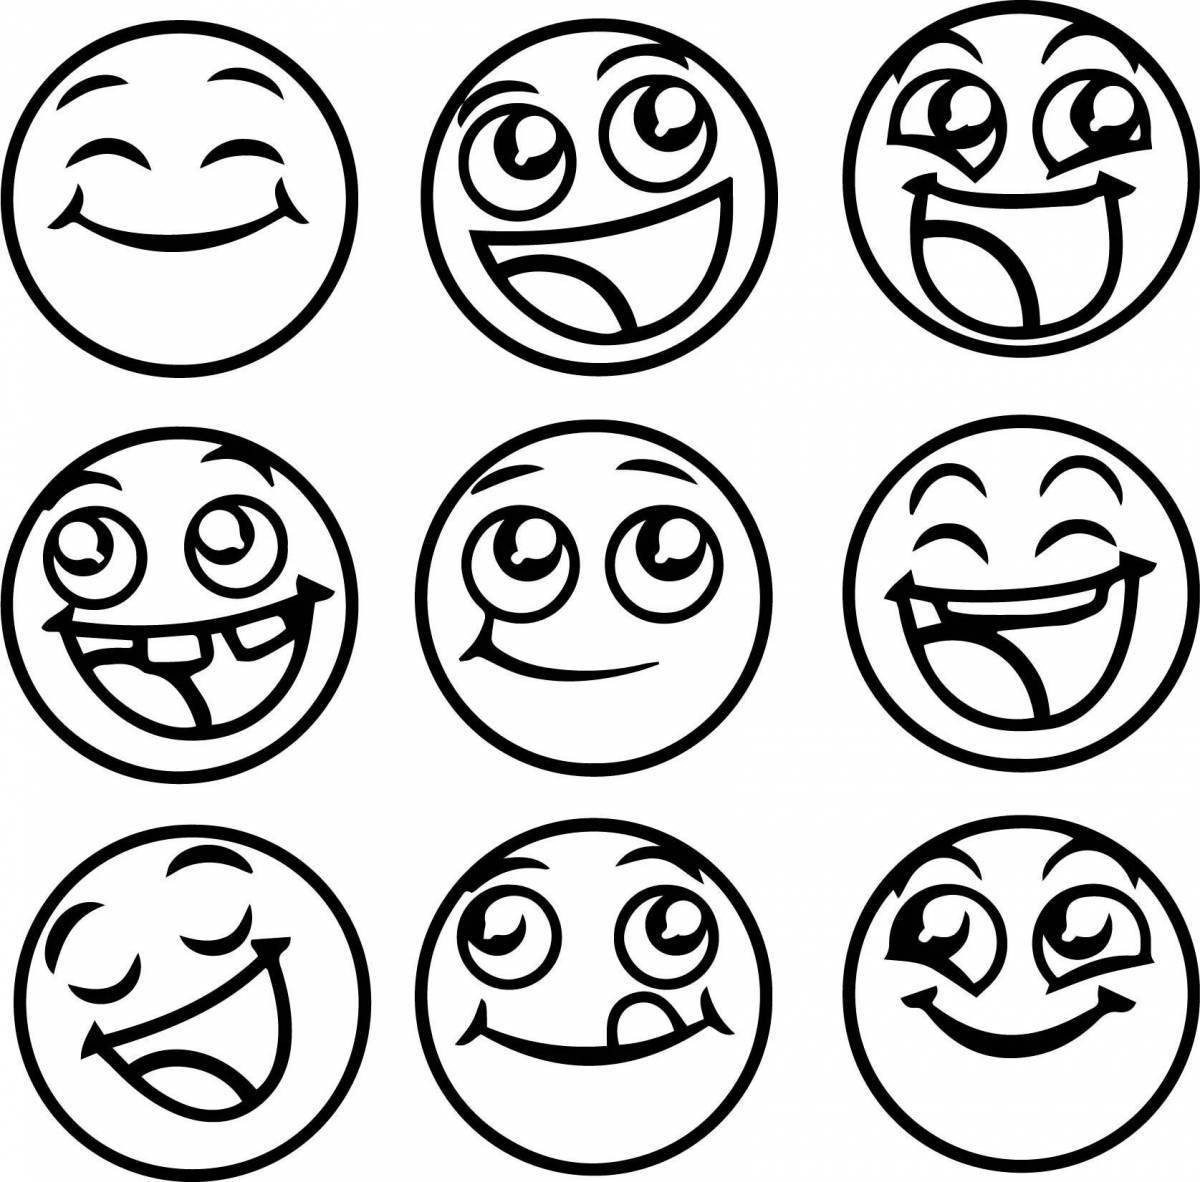 Smilies emotions #2